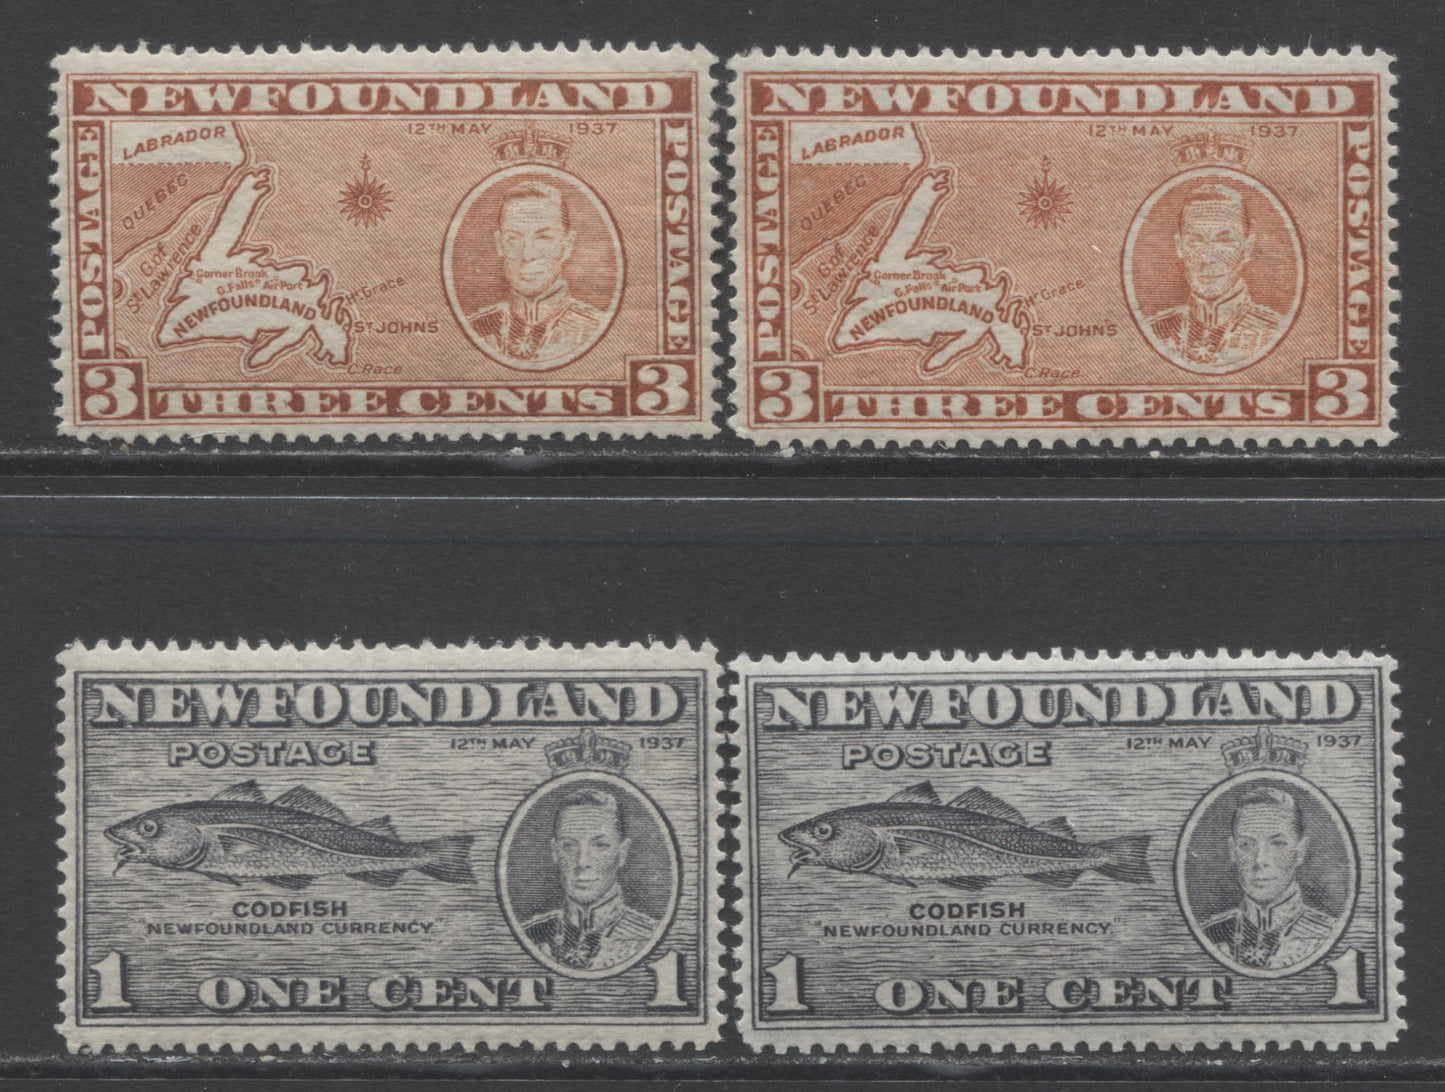 Lot 337 Newfoundland #233, 234, 234a 1c & 3c Gray Black & Orange Brown Codfish & Newfoundland Map, 1937 Long Coronation Issue, 4 VFNH Singles Showing Different Perfs, Both Dies & Major Re-Entry